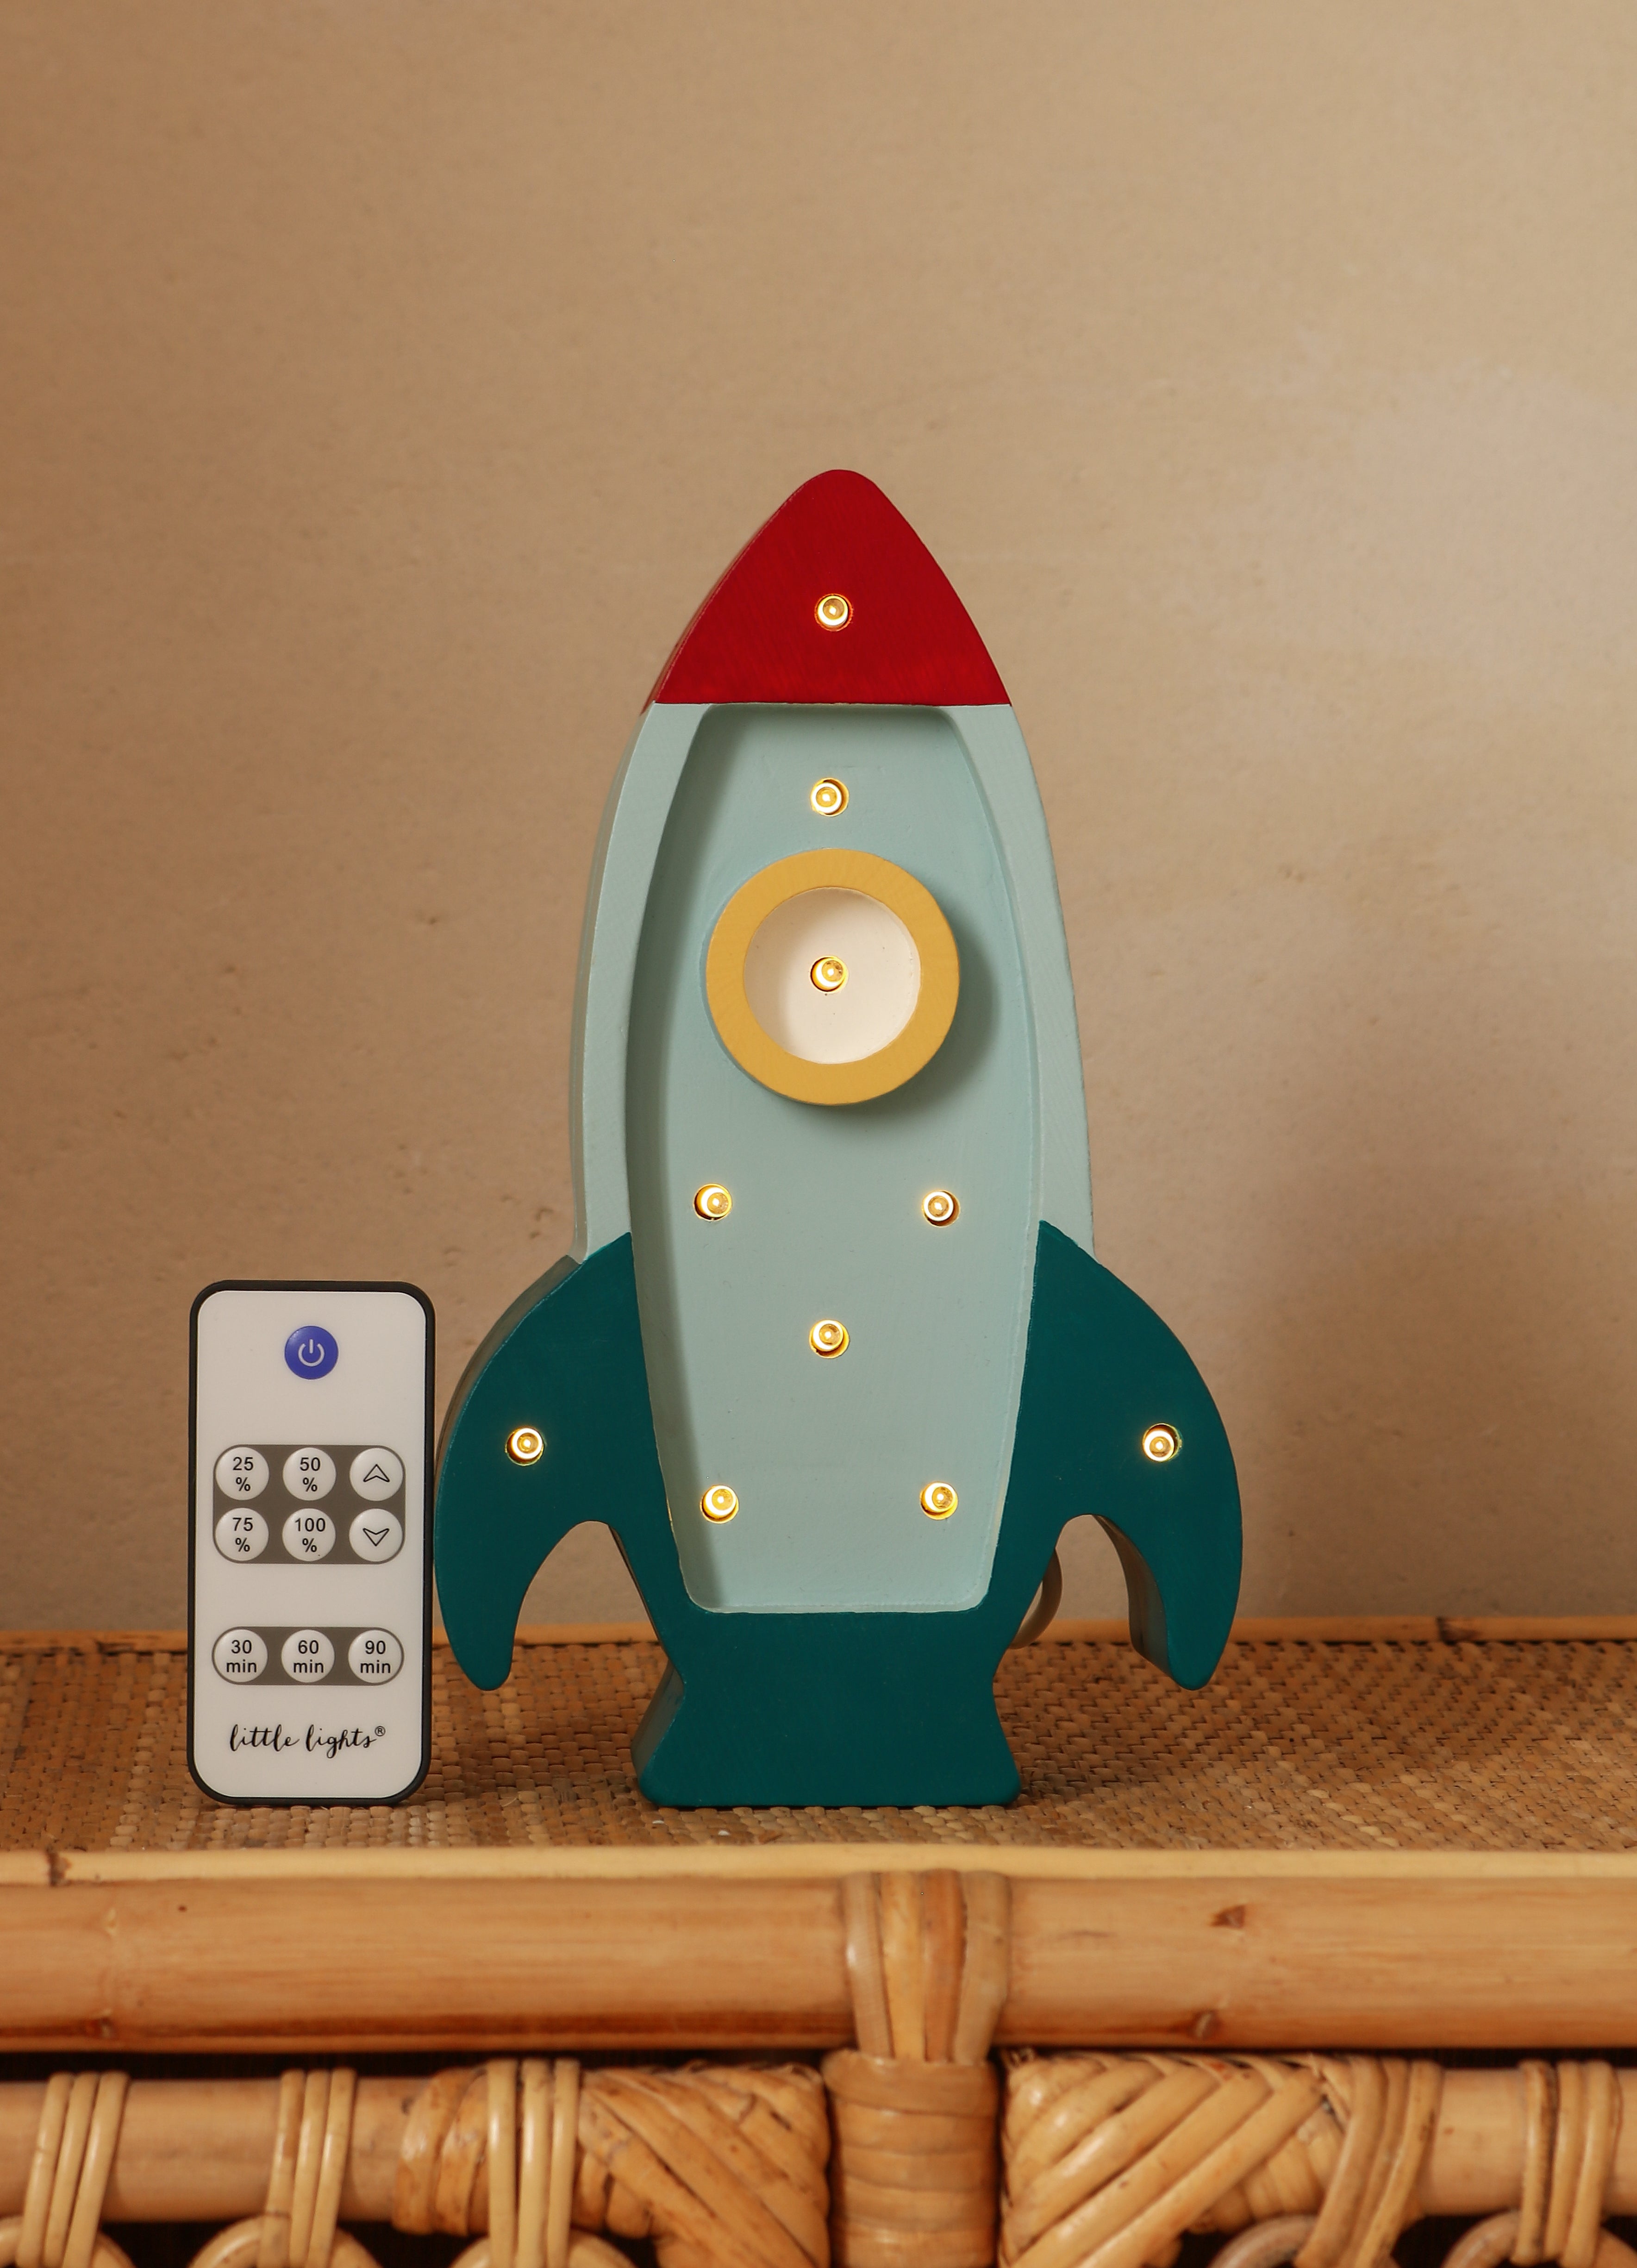 Little Lights Space Rocket Mini Lamp in Teal - Child-friendly LED night lights